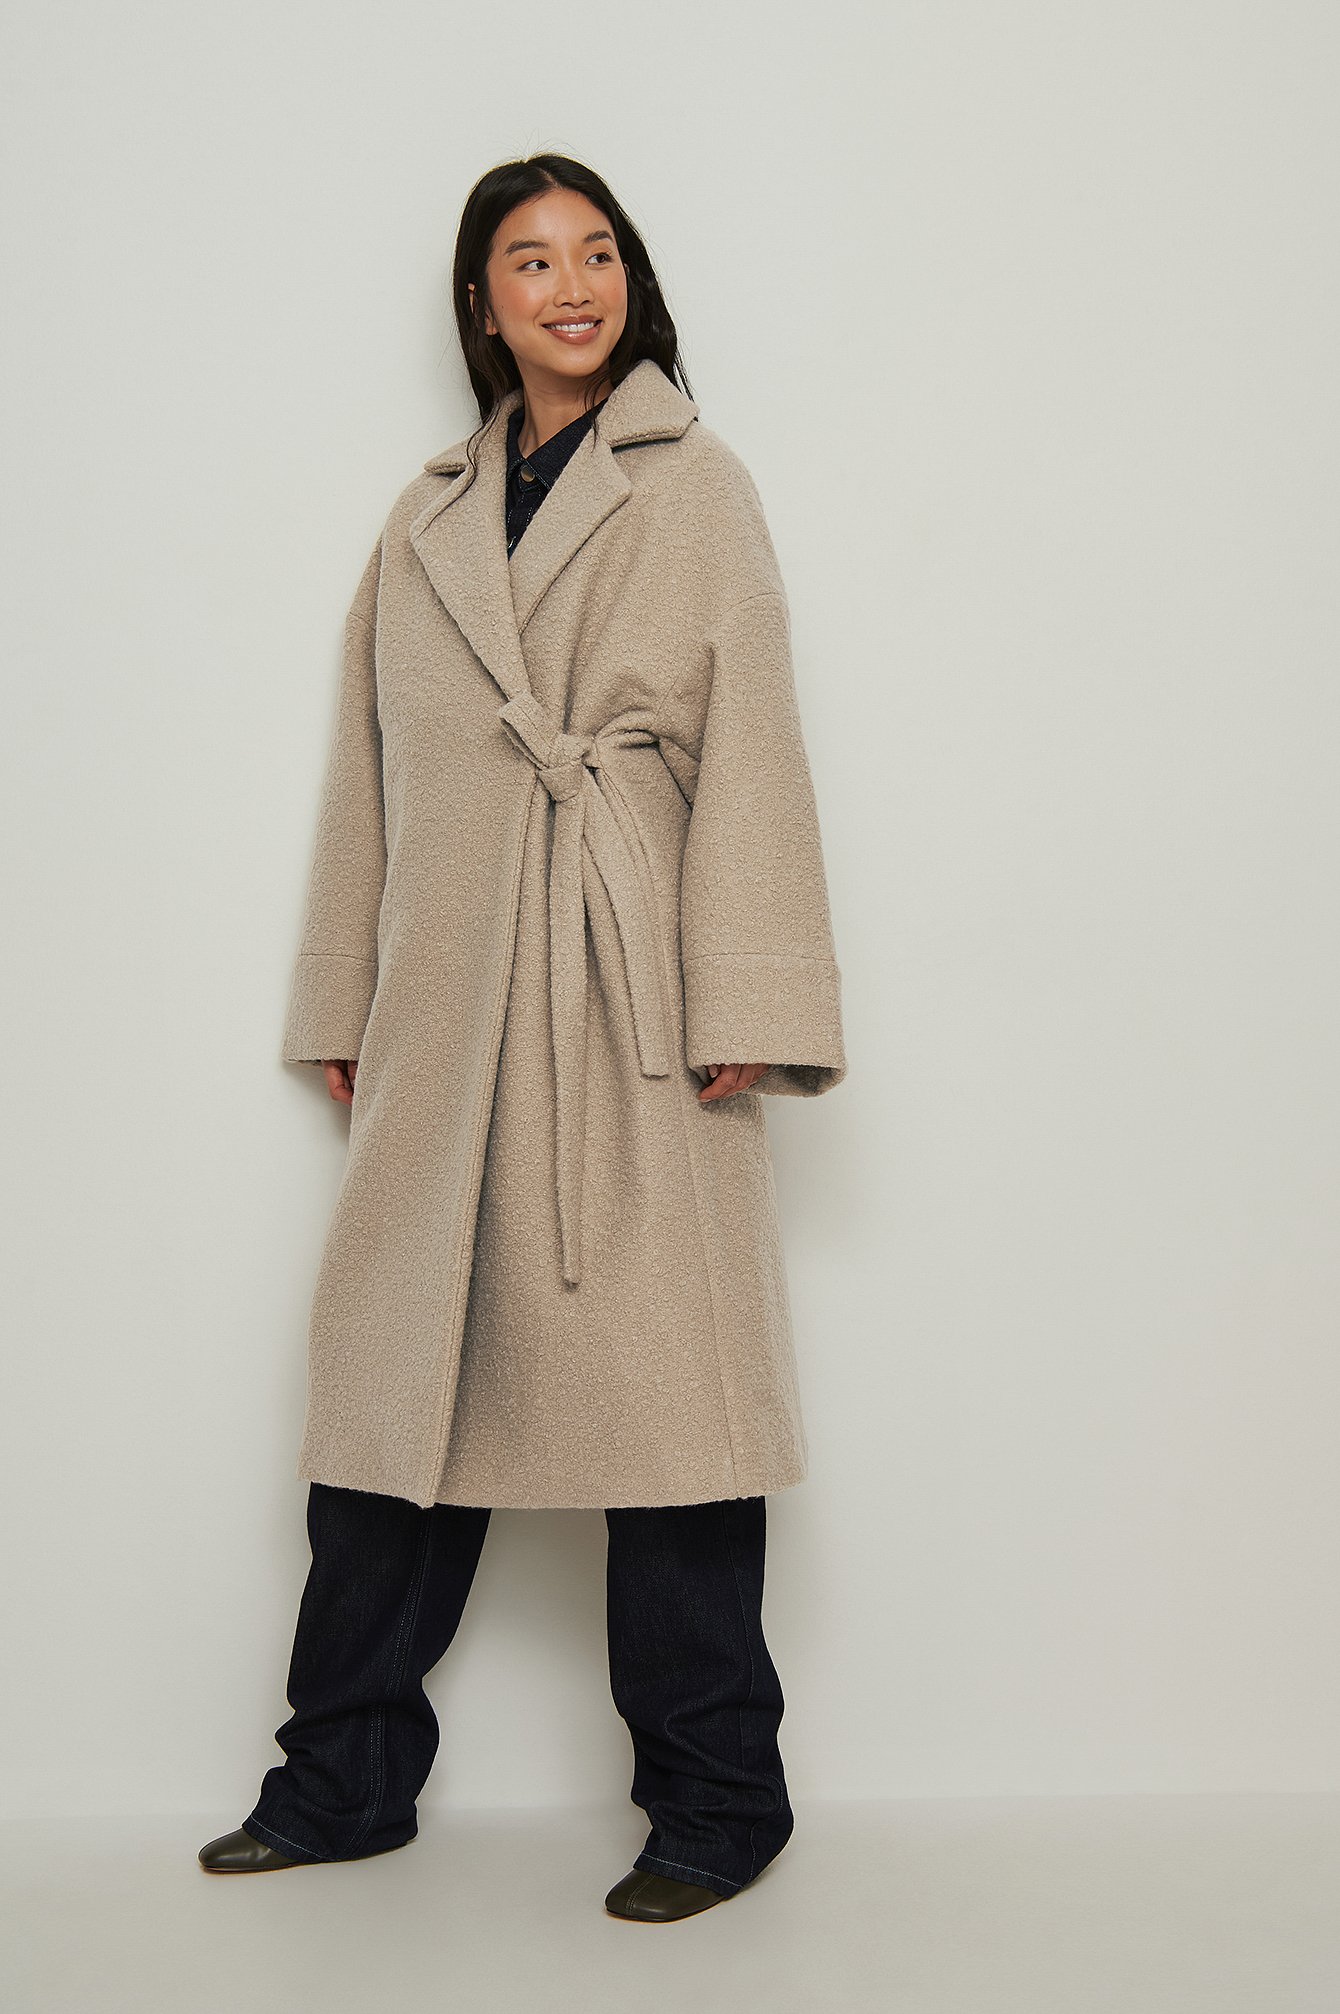 Dropped Shoulder Coat Outfit